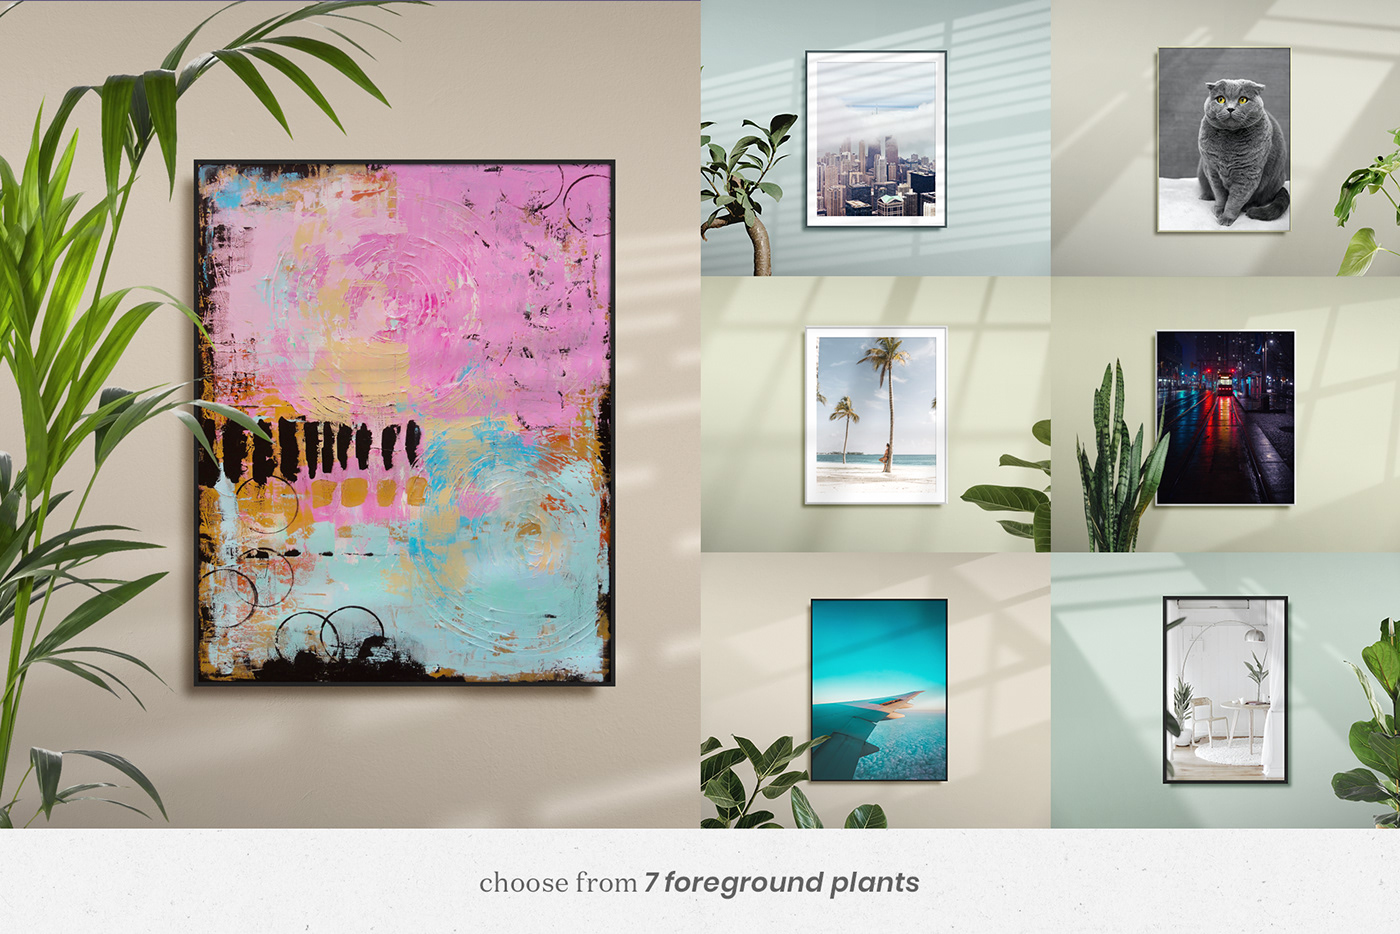 Any Frame Mockup Scene Creator allows you to choose from 7 plant overlays